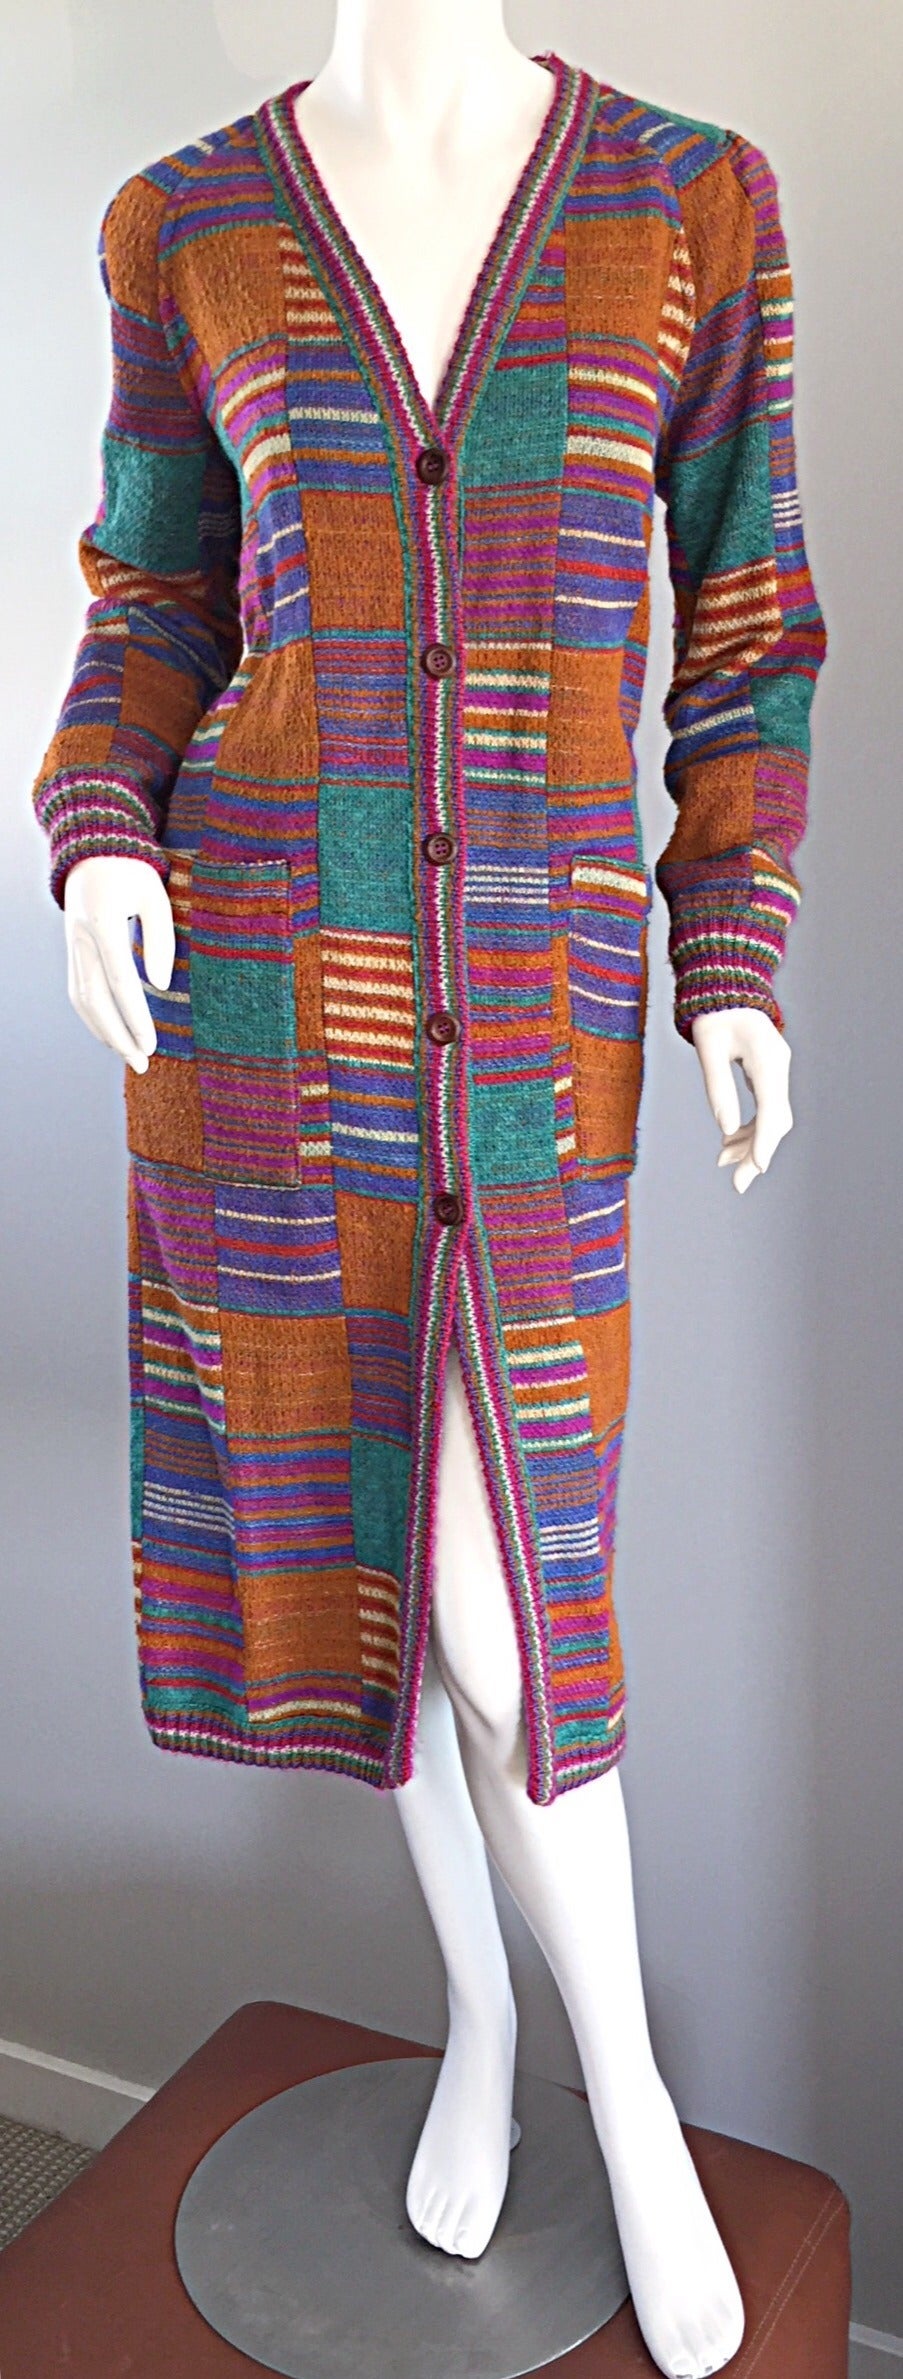 Sensational vintage Missoni REVERSIBLE long cardigan / puffer jacket! Signature Missoni colors and threading on one side, black puffer on the other side! Features pockets on both sides. Such a statement piece, yet timeless, and extremely versatile!